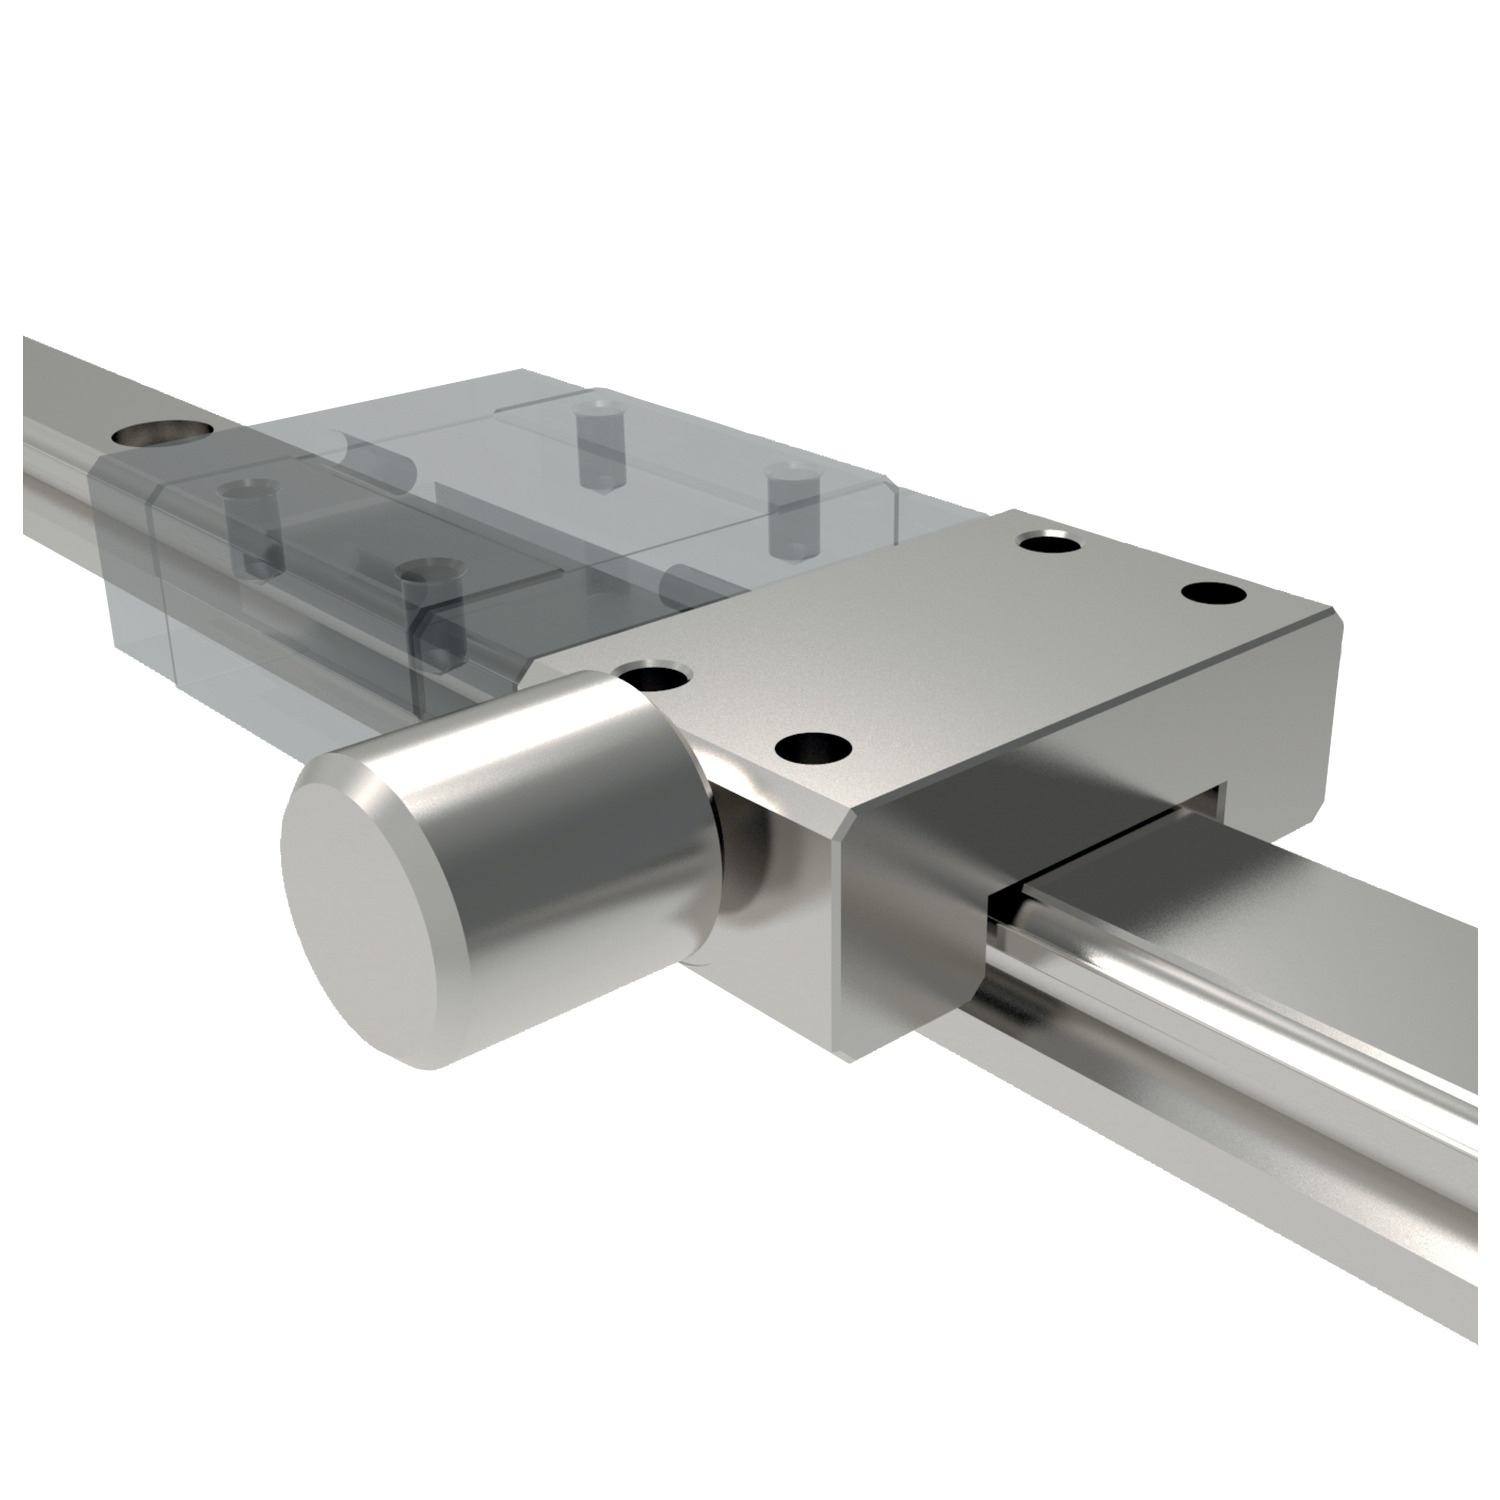 L1010.CL - Manual Clamps for Miniature Rail